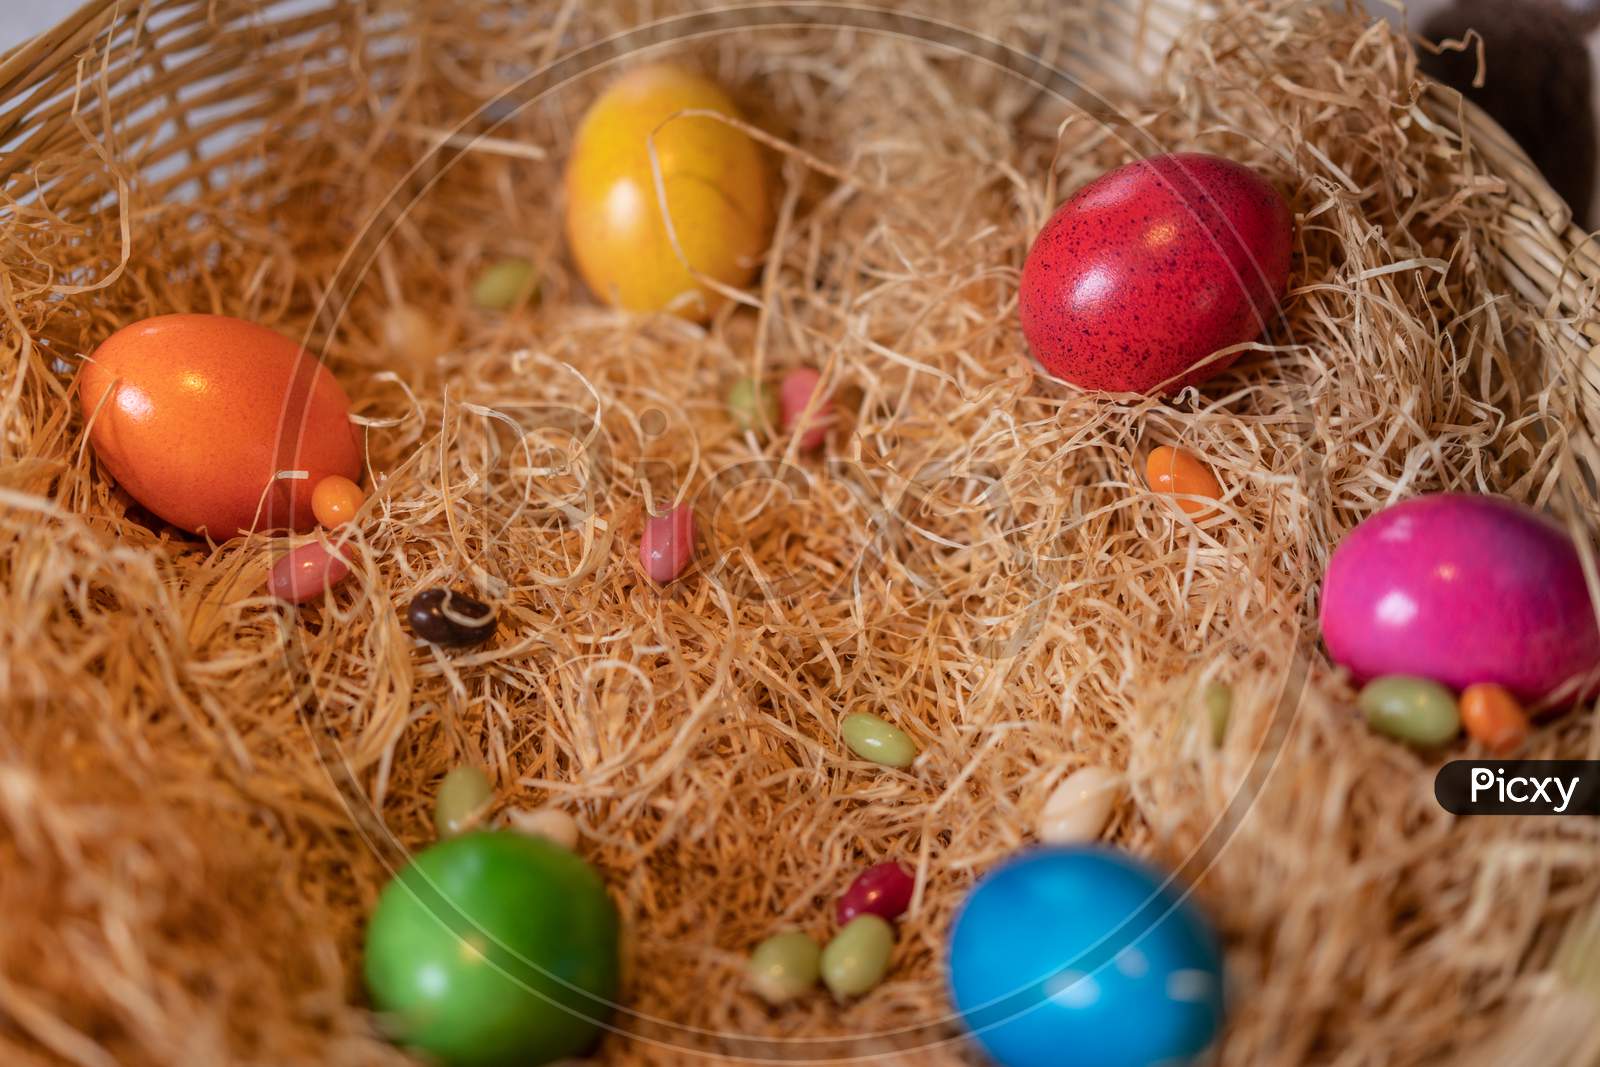 Yellow, Red, Green, Blue, Pink And Orange Colored Cooked Easter Eggs Put In A Nest Of Straw In Straw Basket On White Ground.